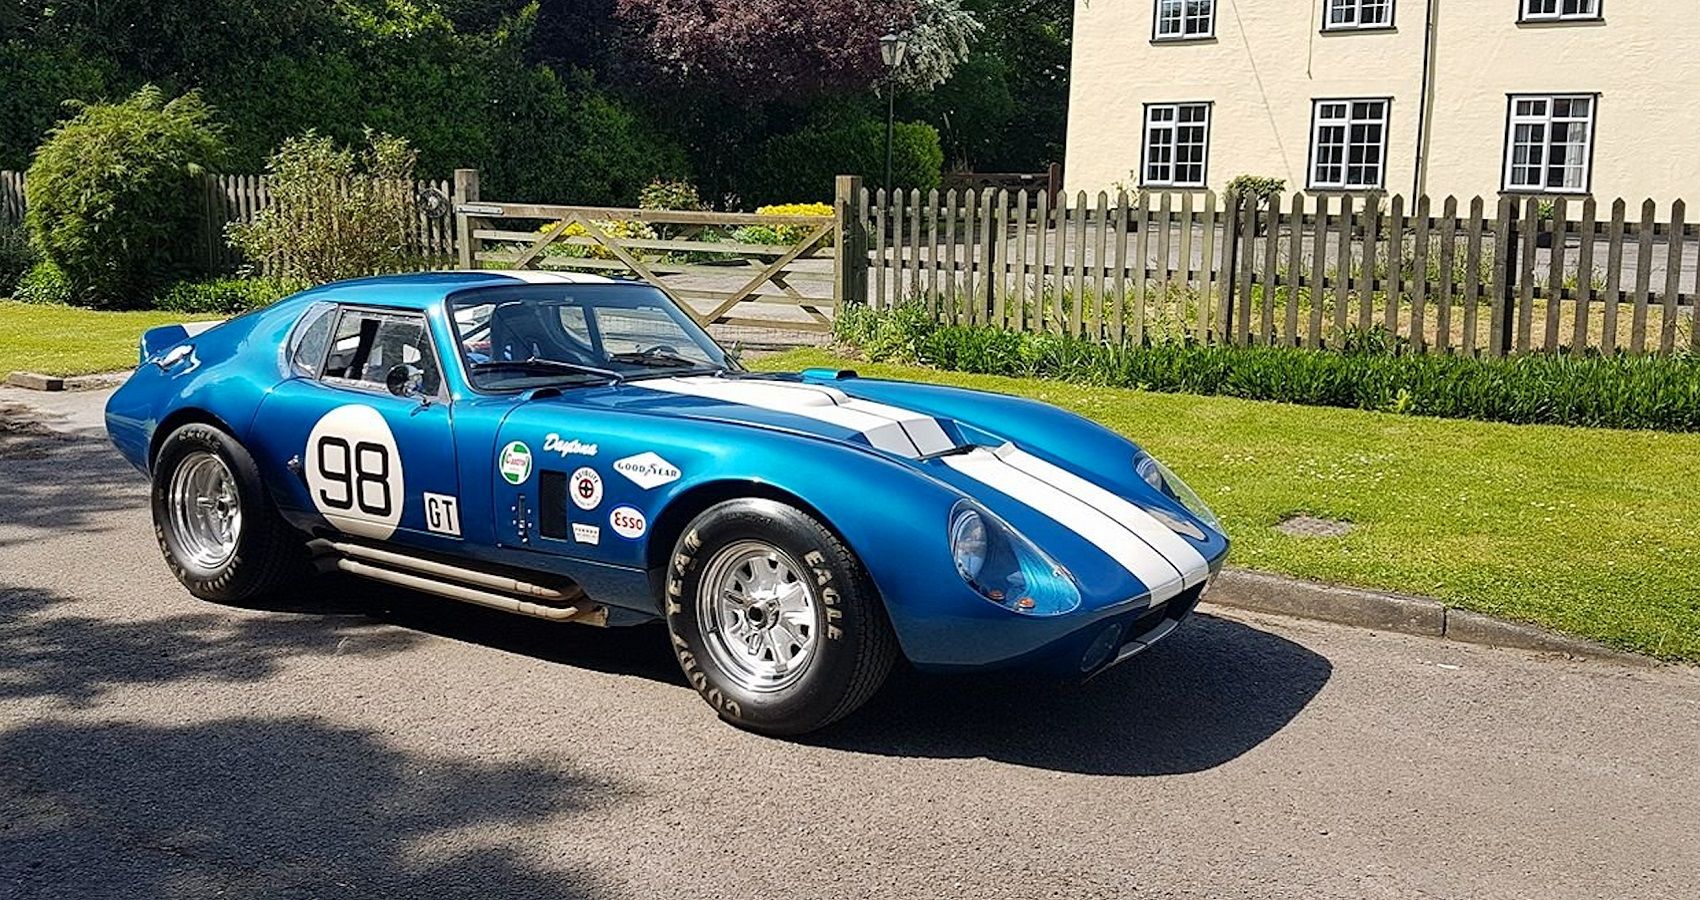 Here Are The Greatest Kit Cars We'd Buy Any Day